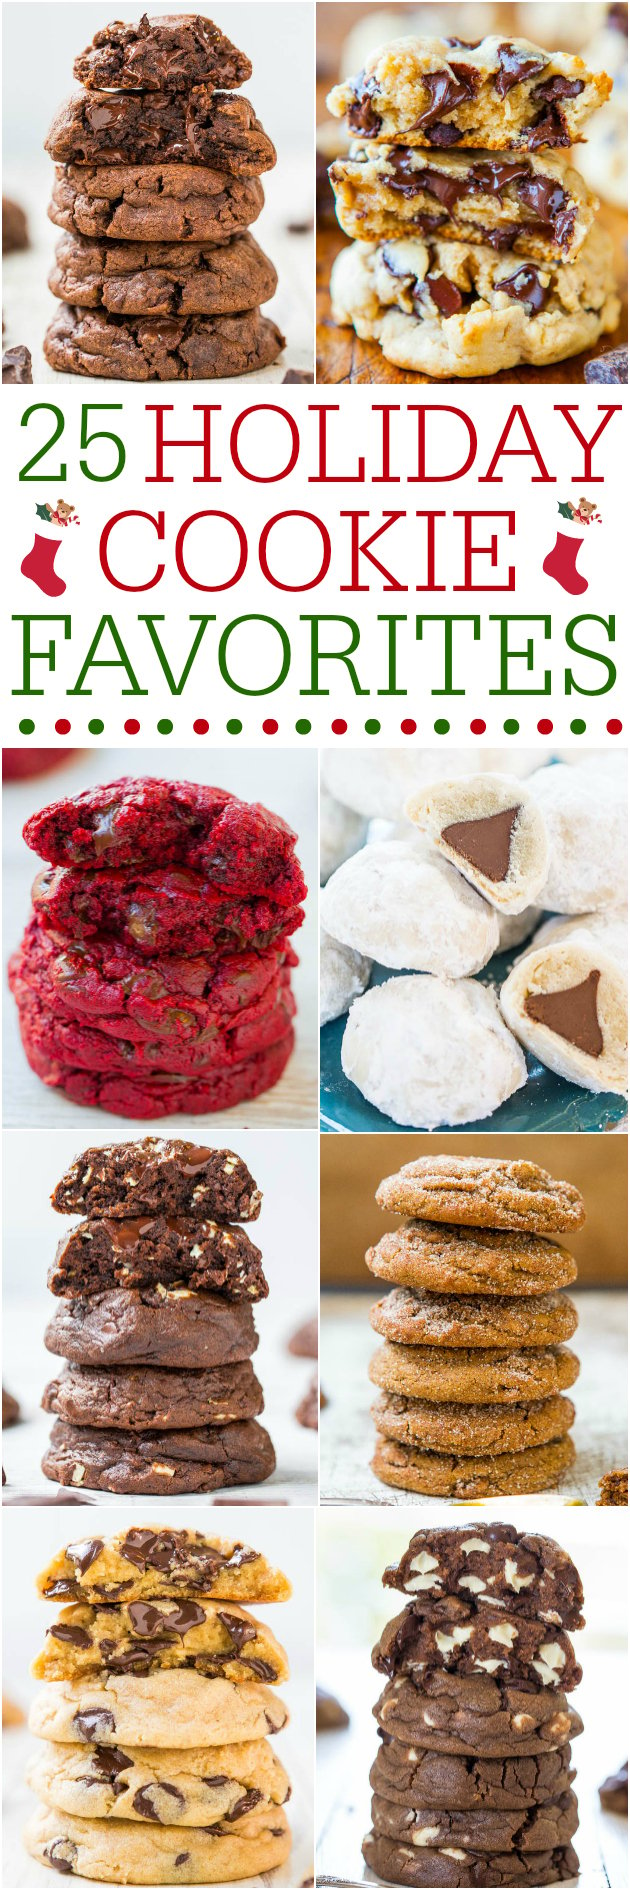 25+ Easy Christmas Cookie Ideas — If you’re looking for tried and true Christmas cookie recipes that'll be a hit with your family, friends, and cookie exchanges you're a part of, you've come to the right place.